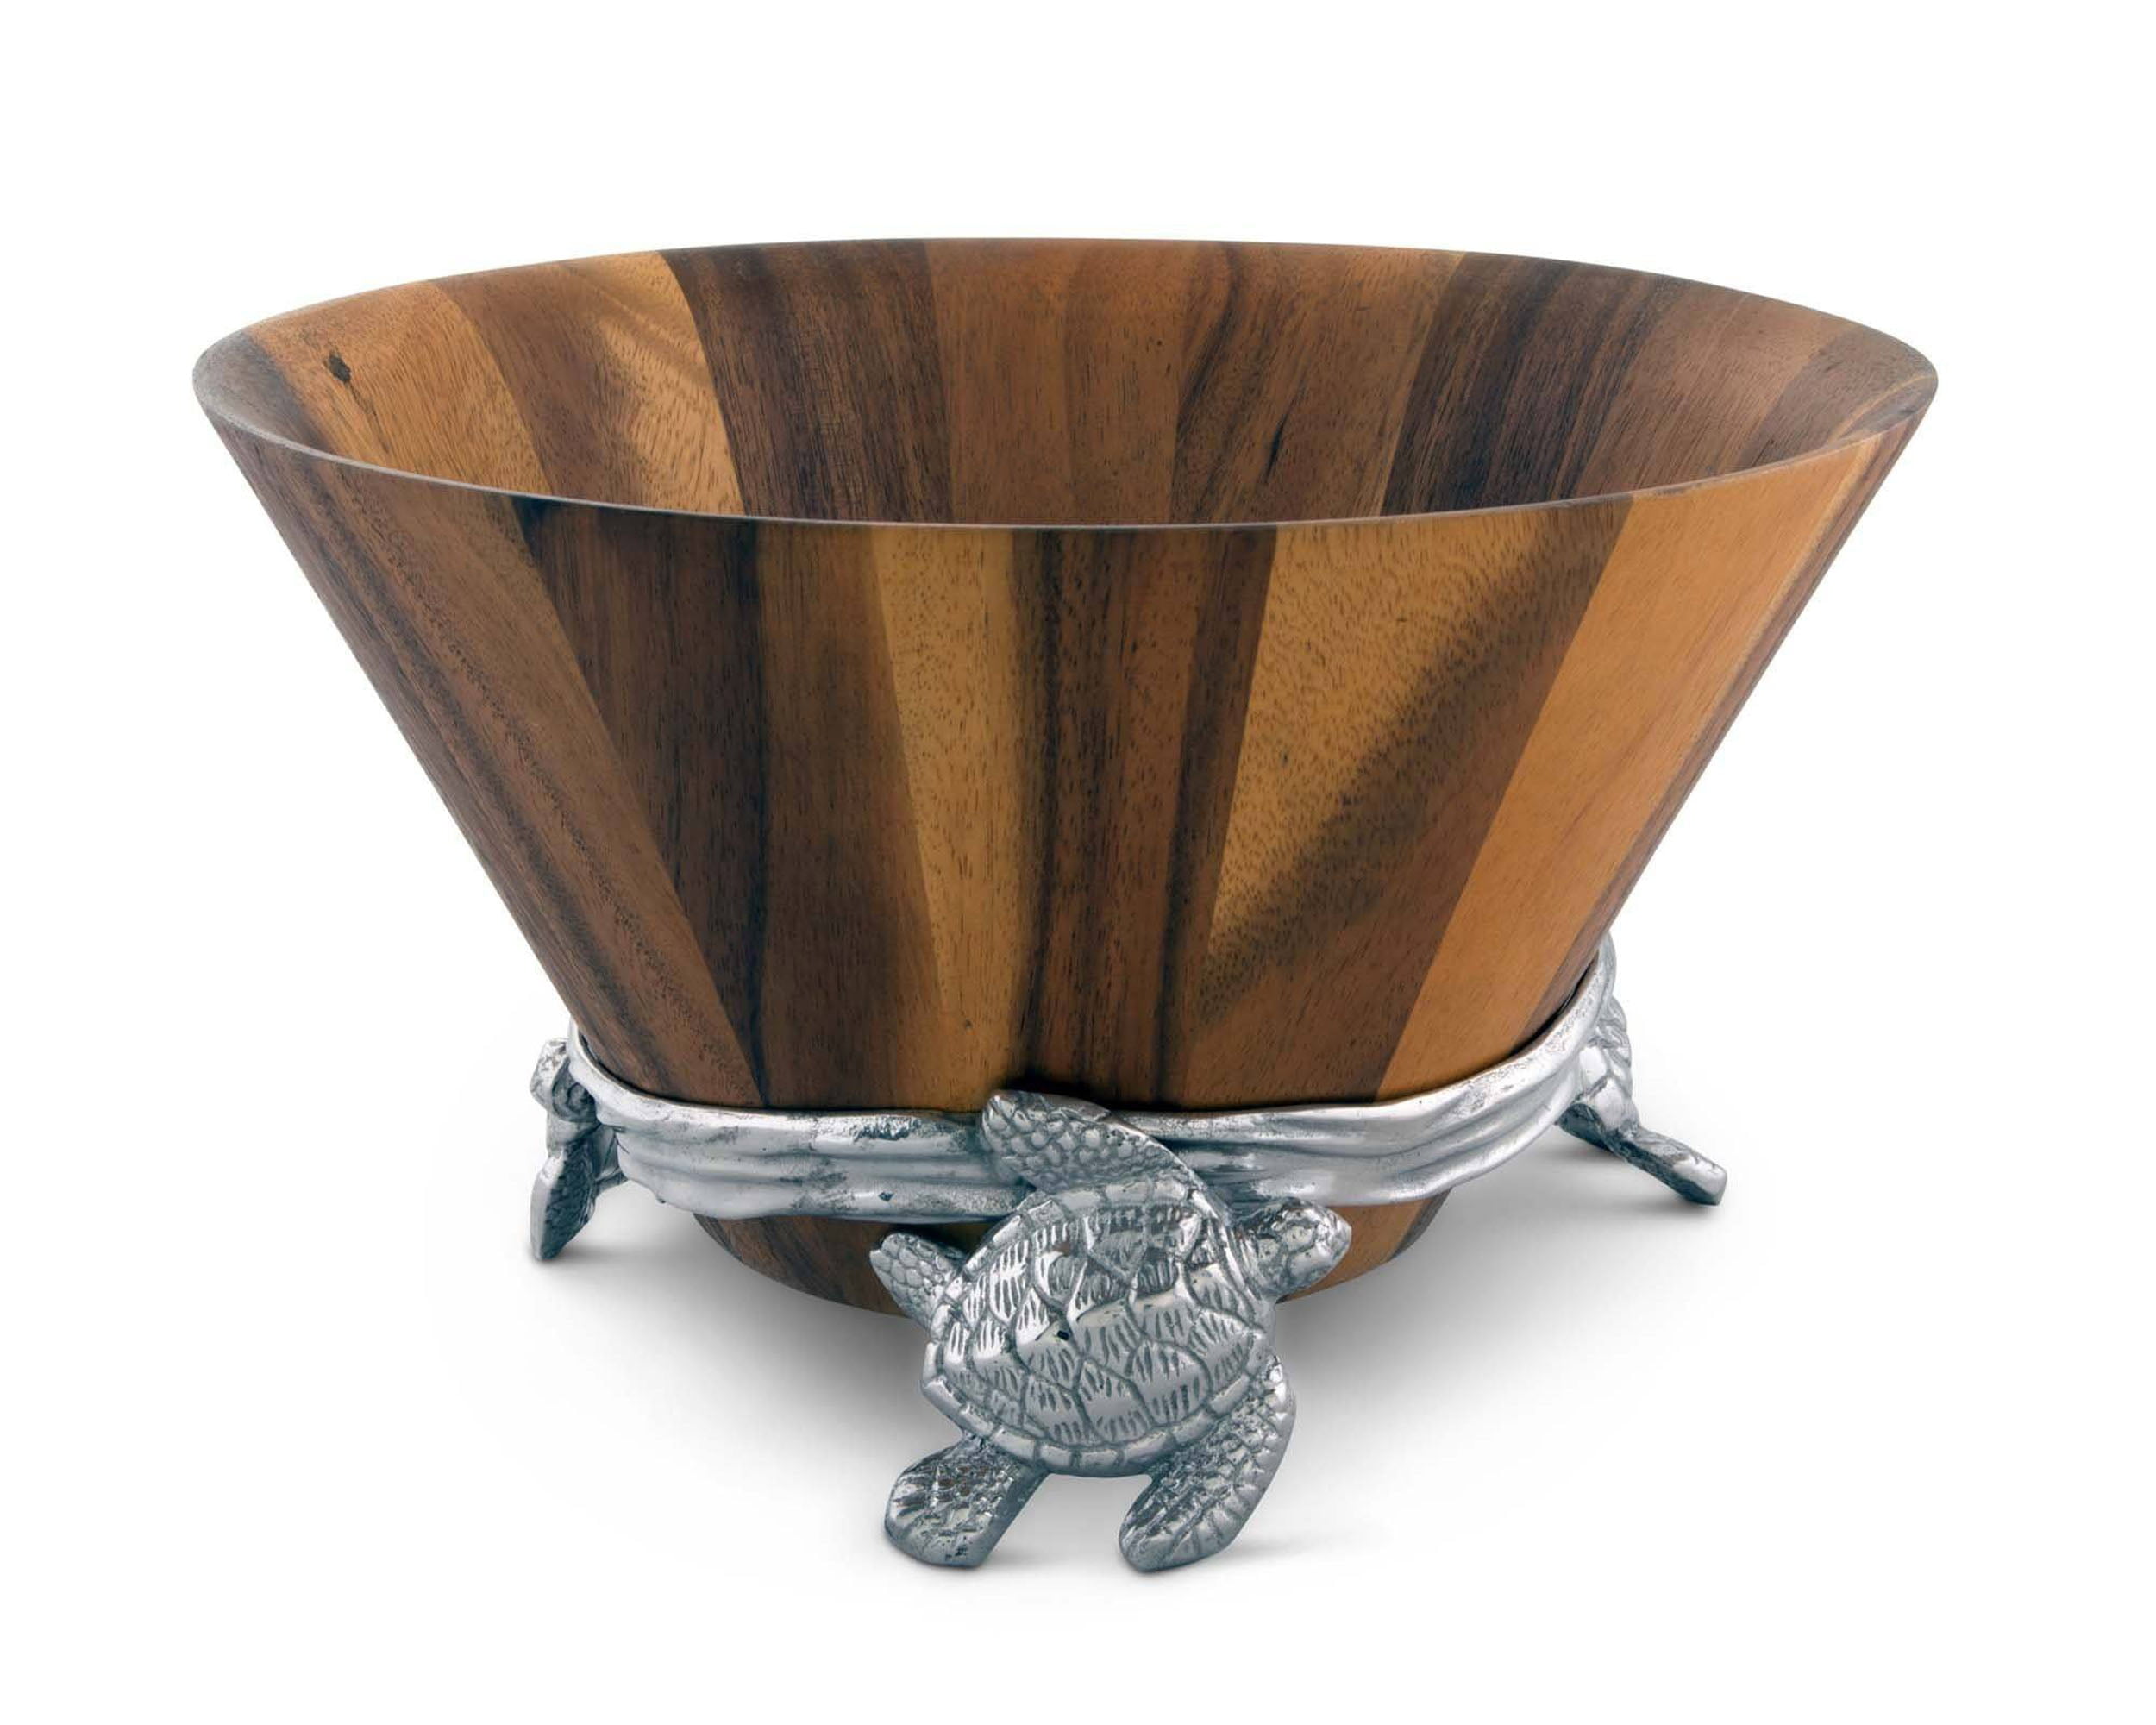 Ocean/Coastal Table 2 pieces Arthur Court Acacia Wood Salad Serving Bowl with Swimming Sea Turtle Metal Cast Aluminum Stand 